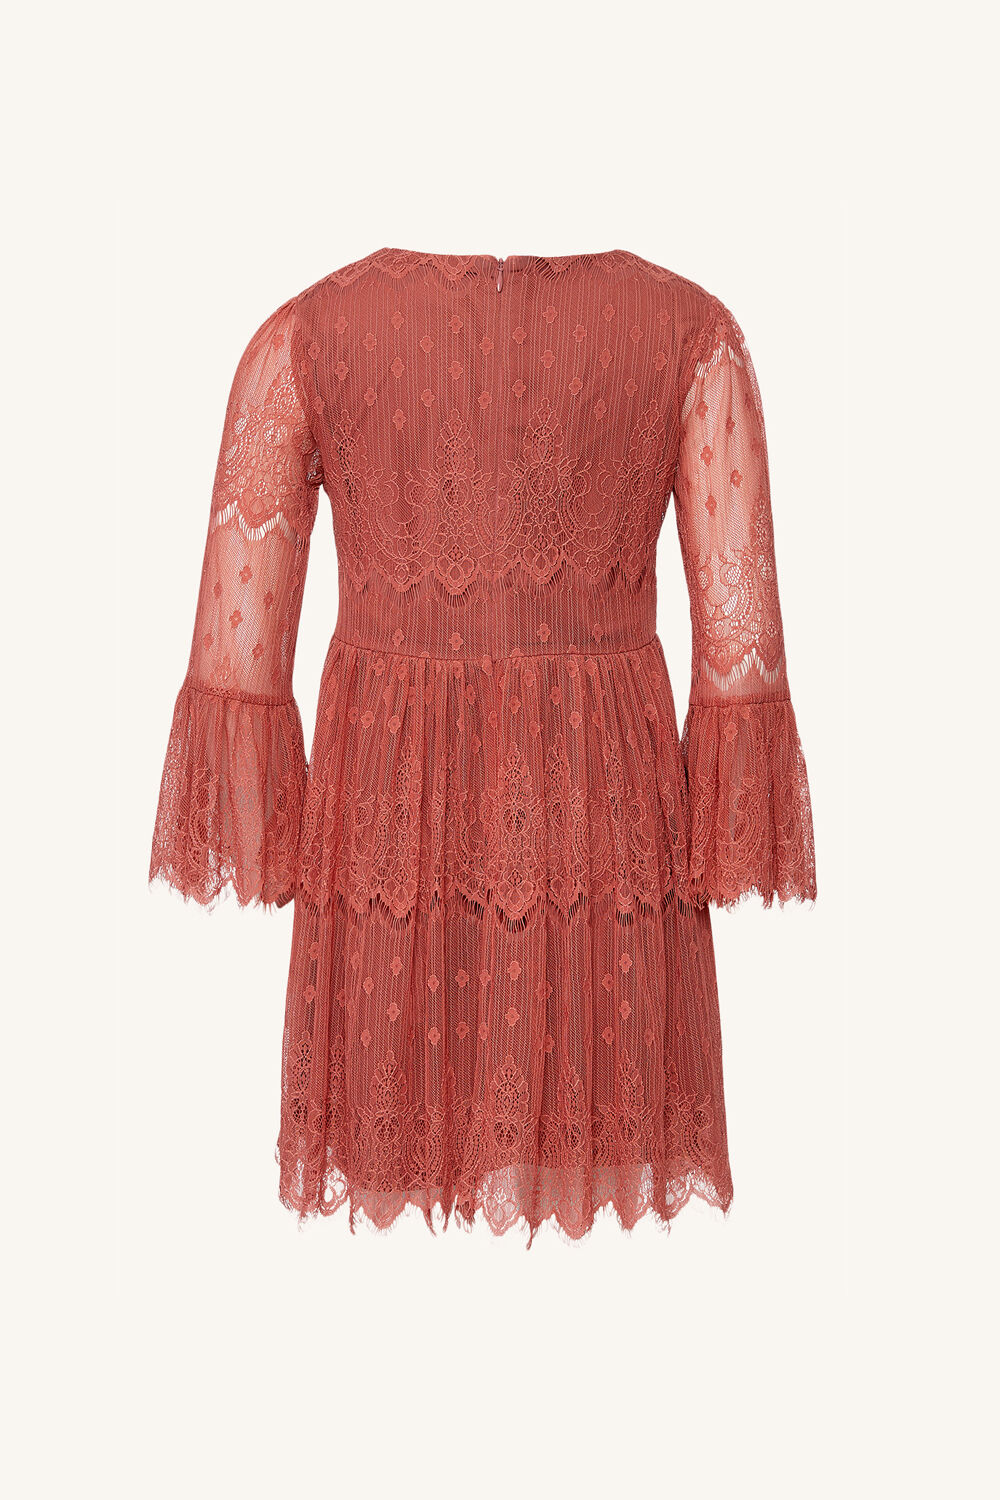 Girls LIANNI LACE DRESS in colour MELLOW ROSE